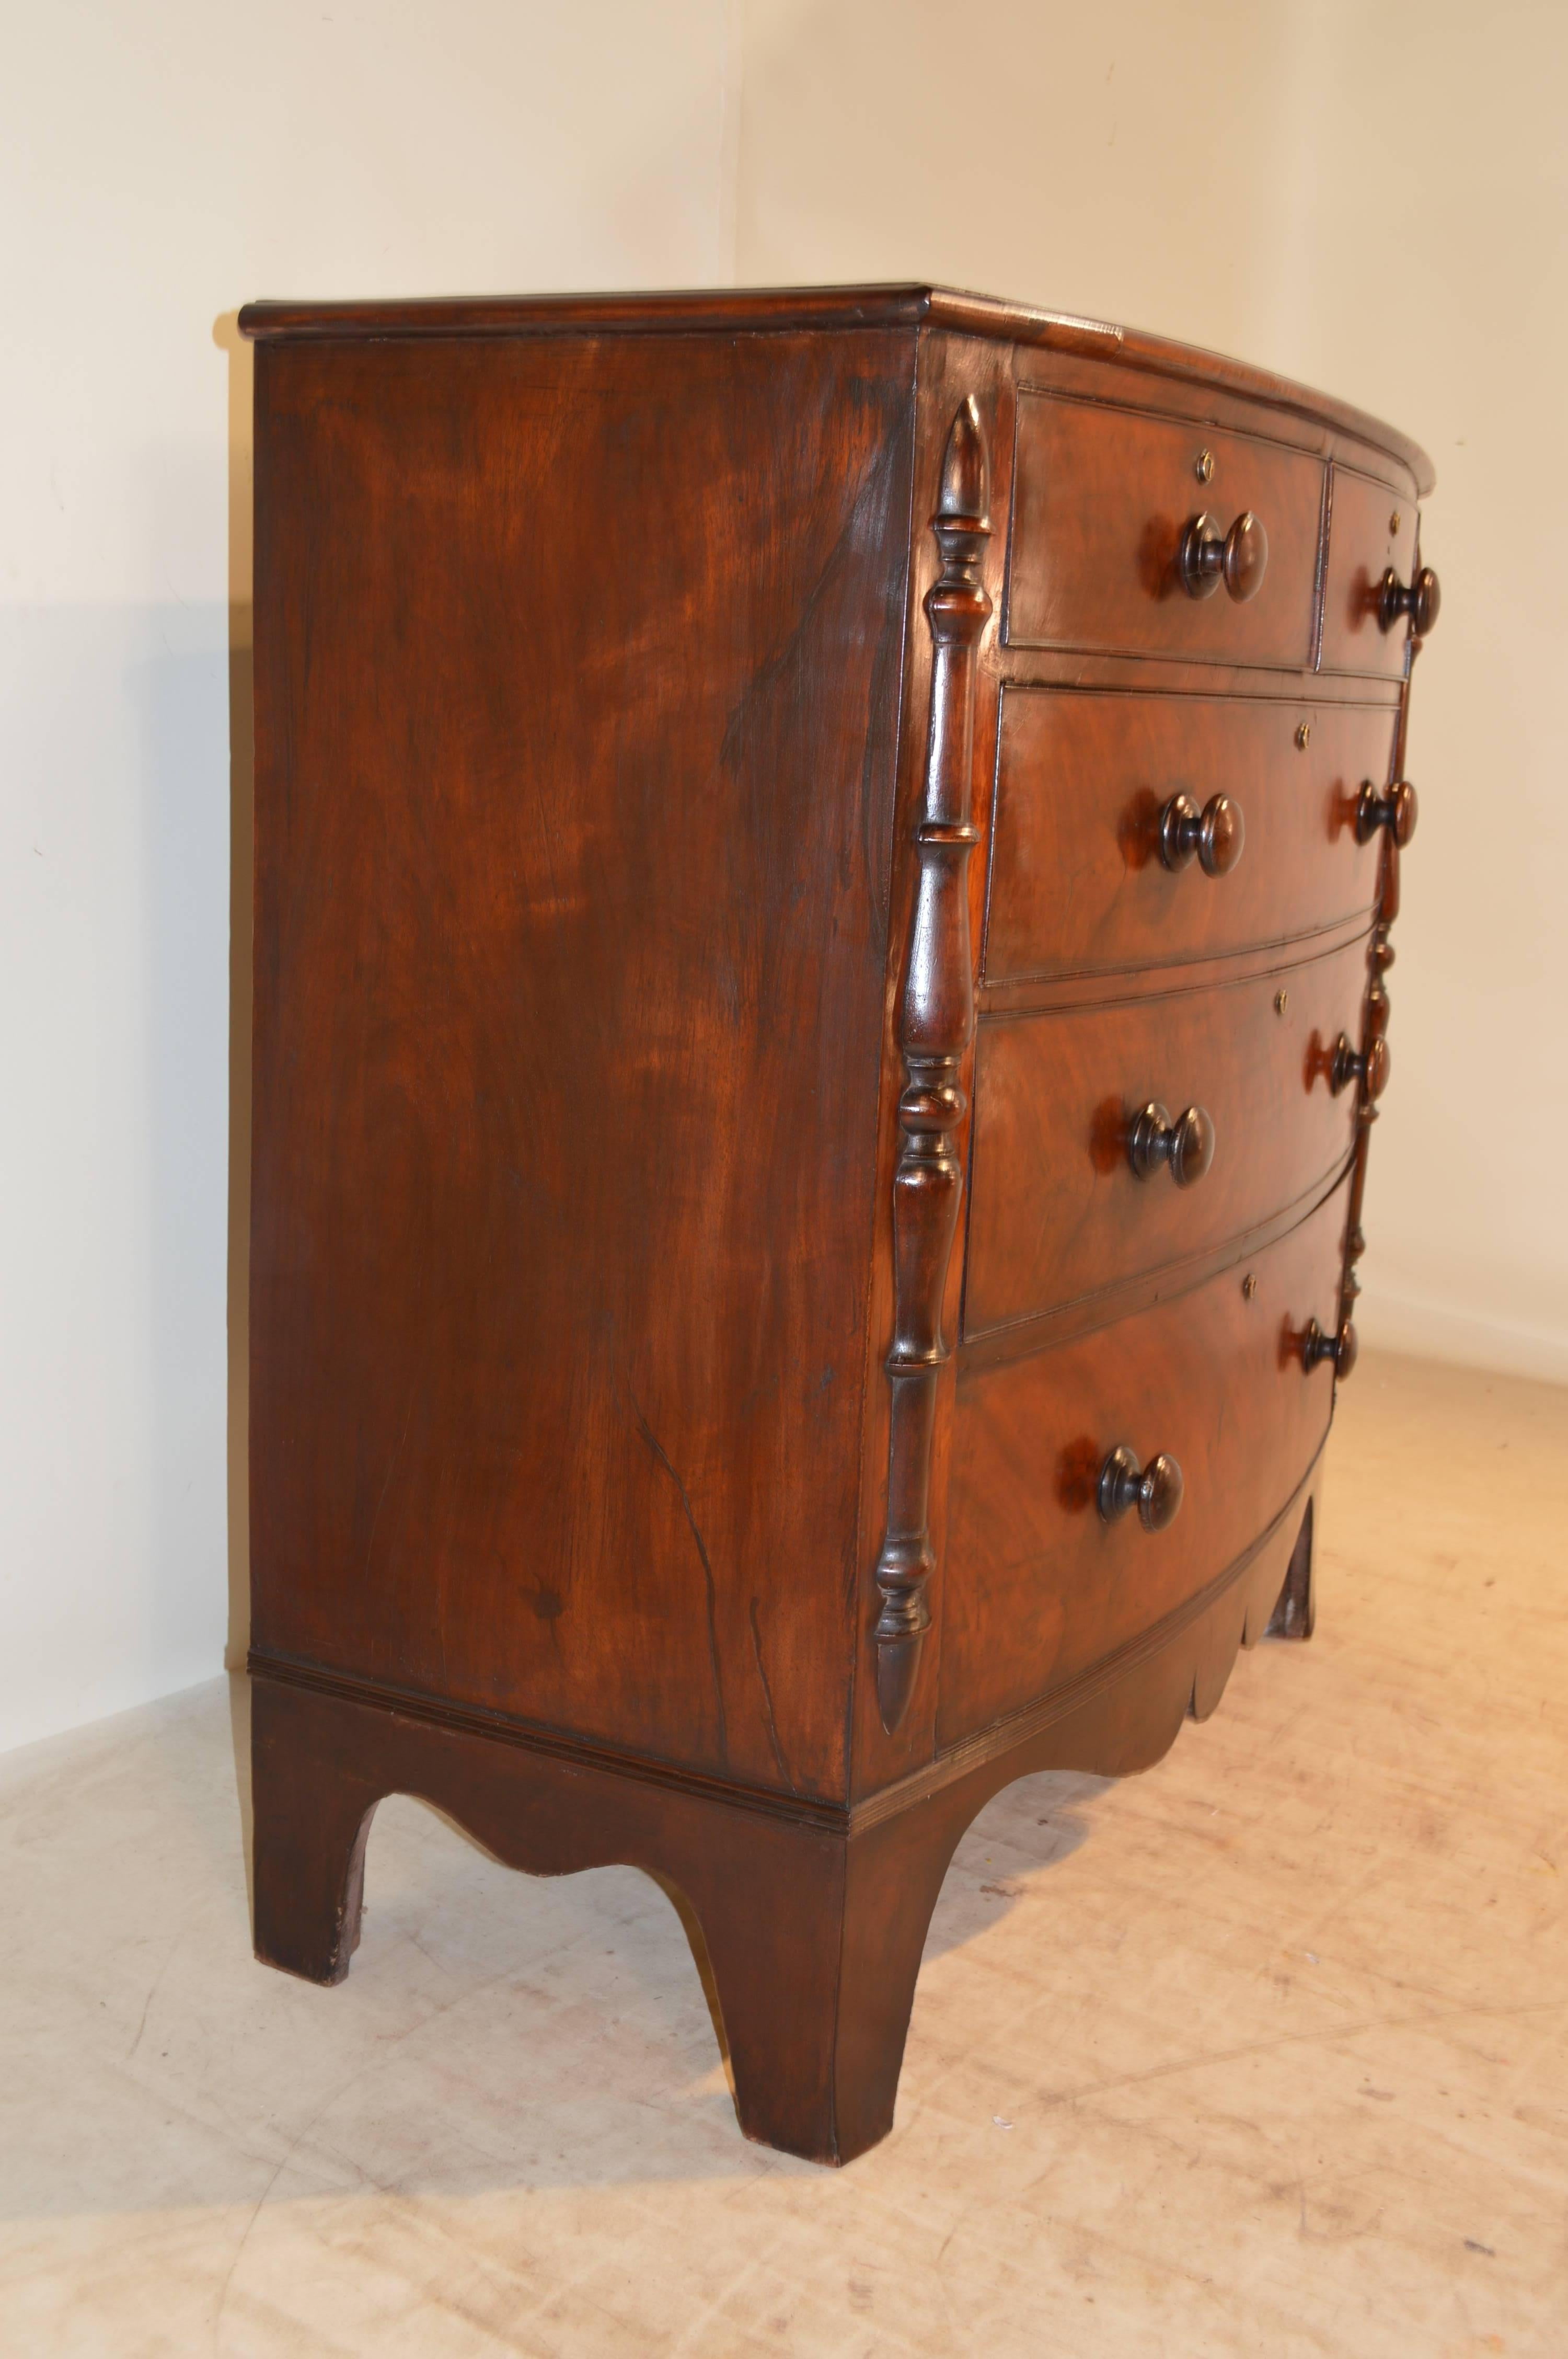 19th century English bowfront chest of drawers made from mahogany. The top has a beveled edge and follows down to a two drawer over three drawer configuration, all flanked by applied split column decoration. The skirt is scalloped and the case is